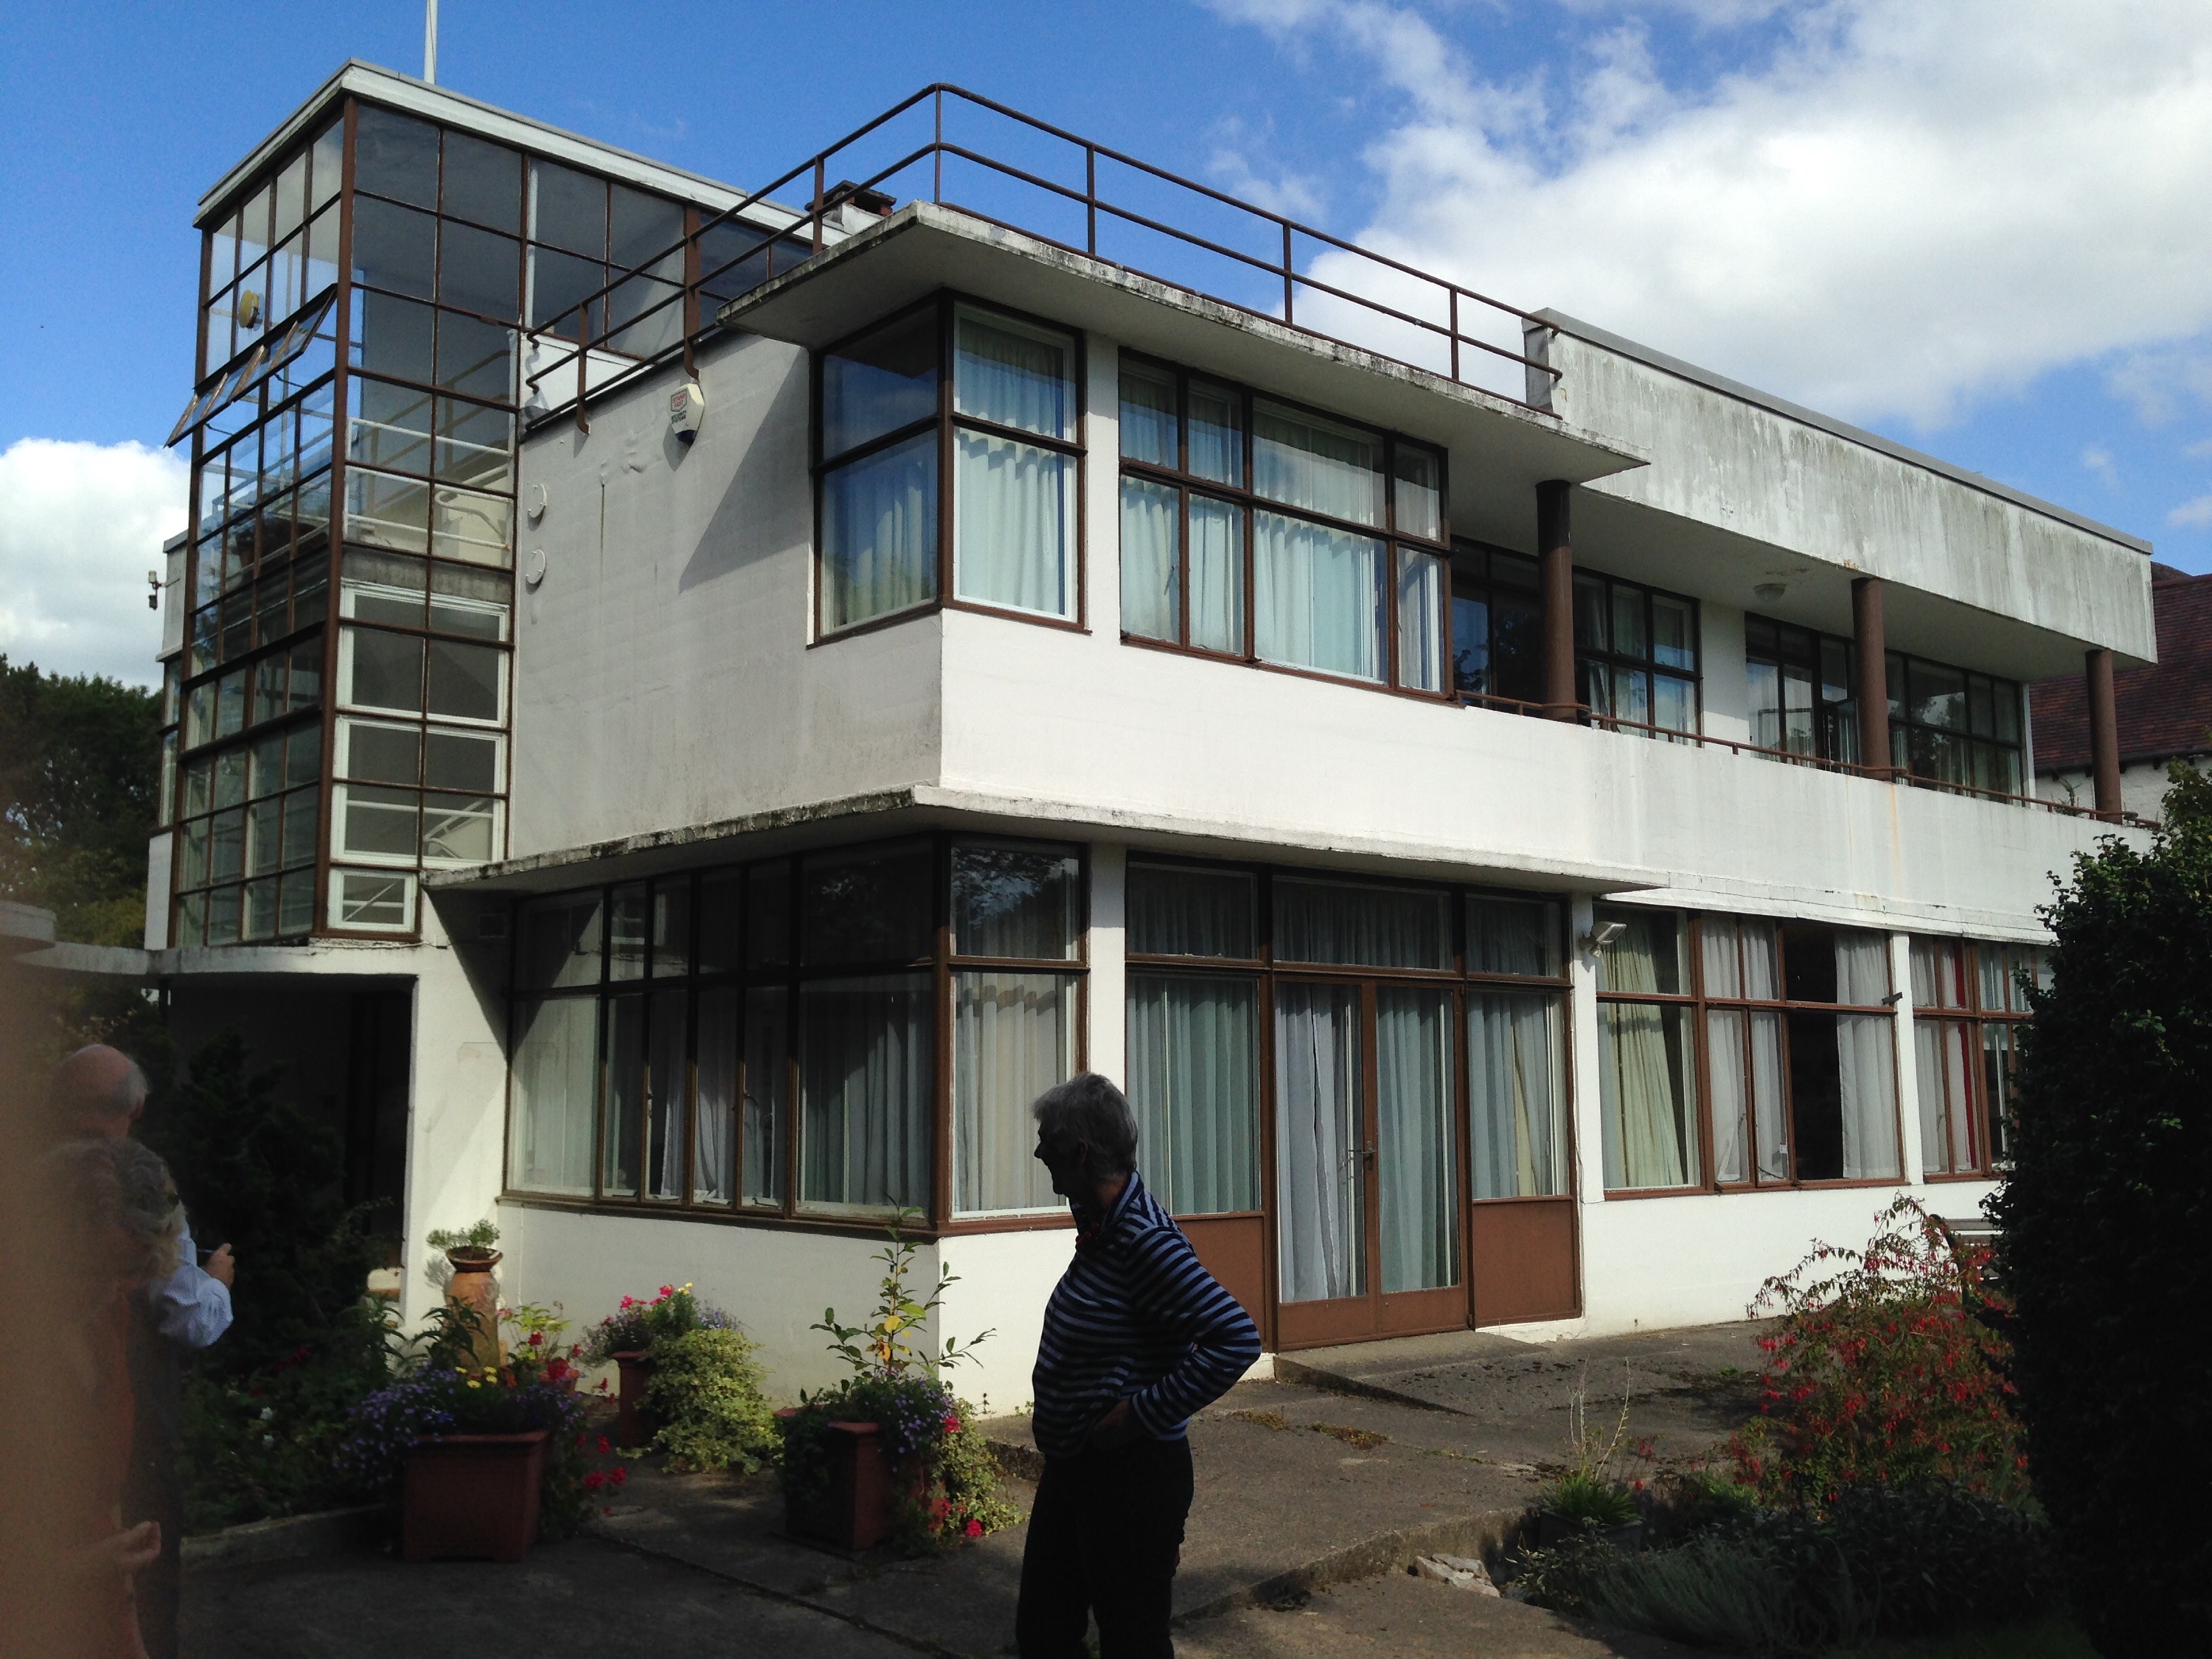 Bristol's Modernist Architecture – The Concrete House | Clay and Fire